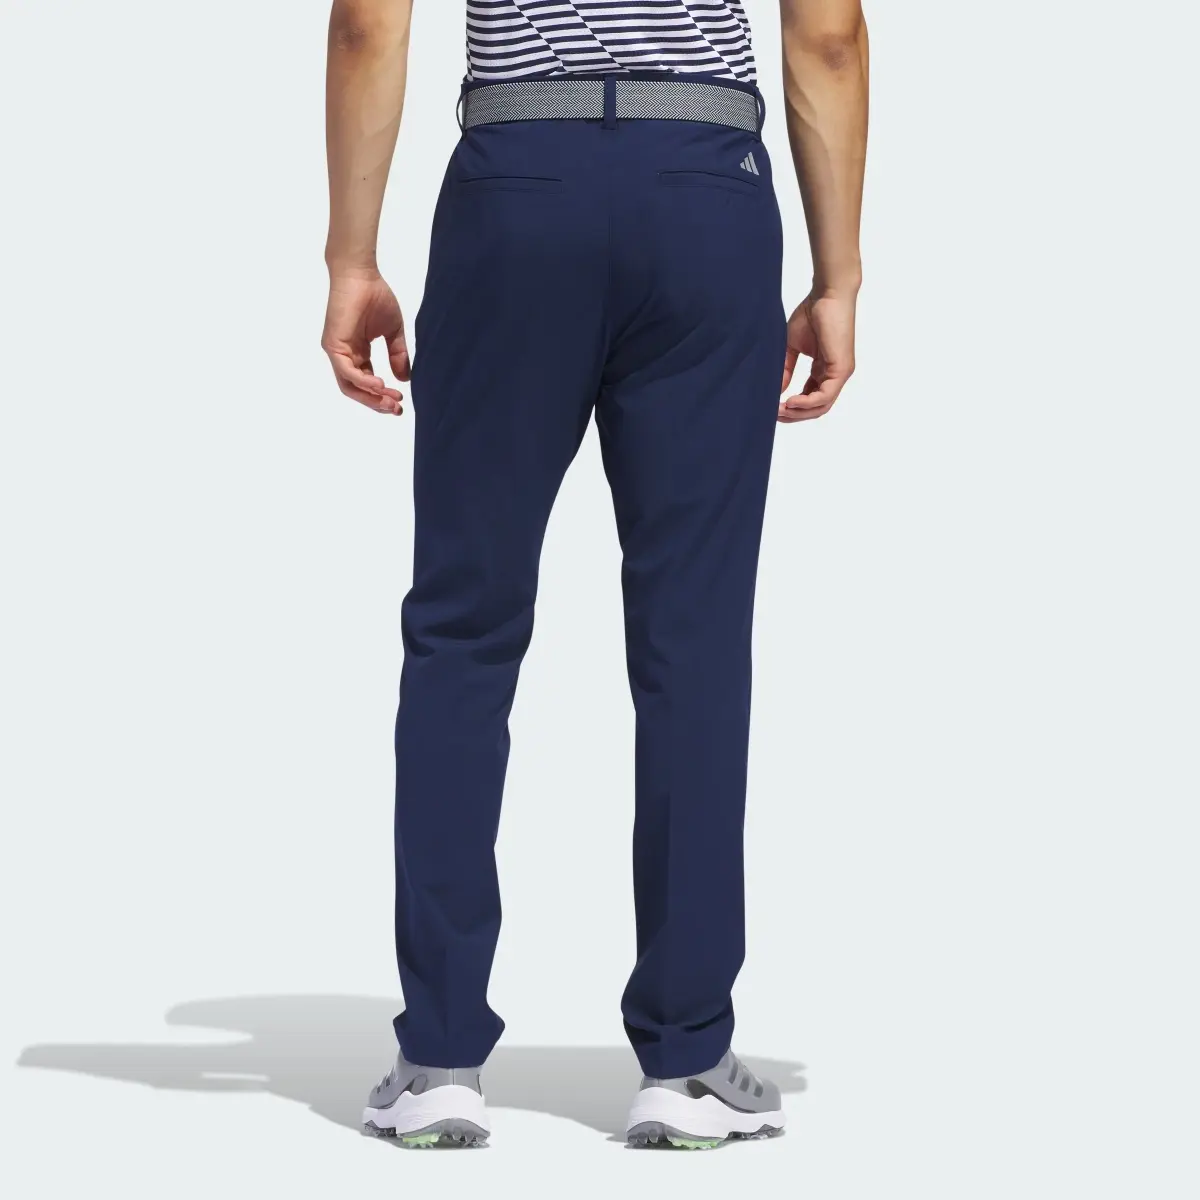 Adidas Ultimate365 Tapered Golf Pants. 2